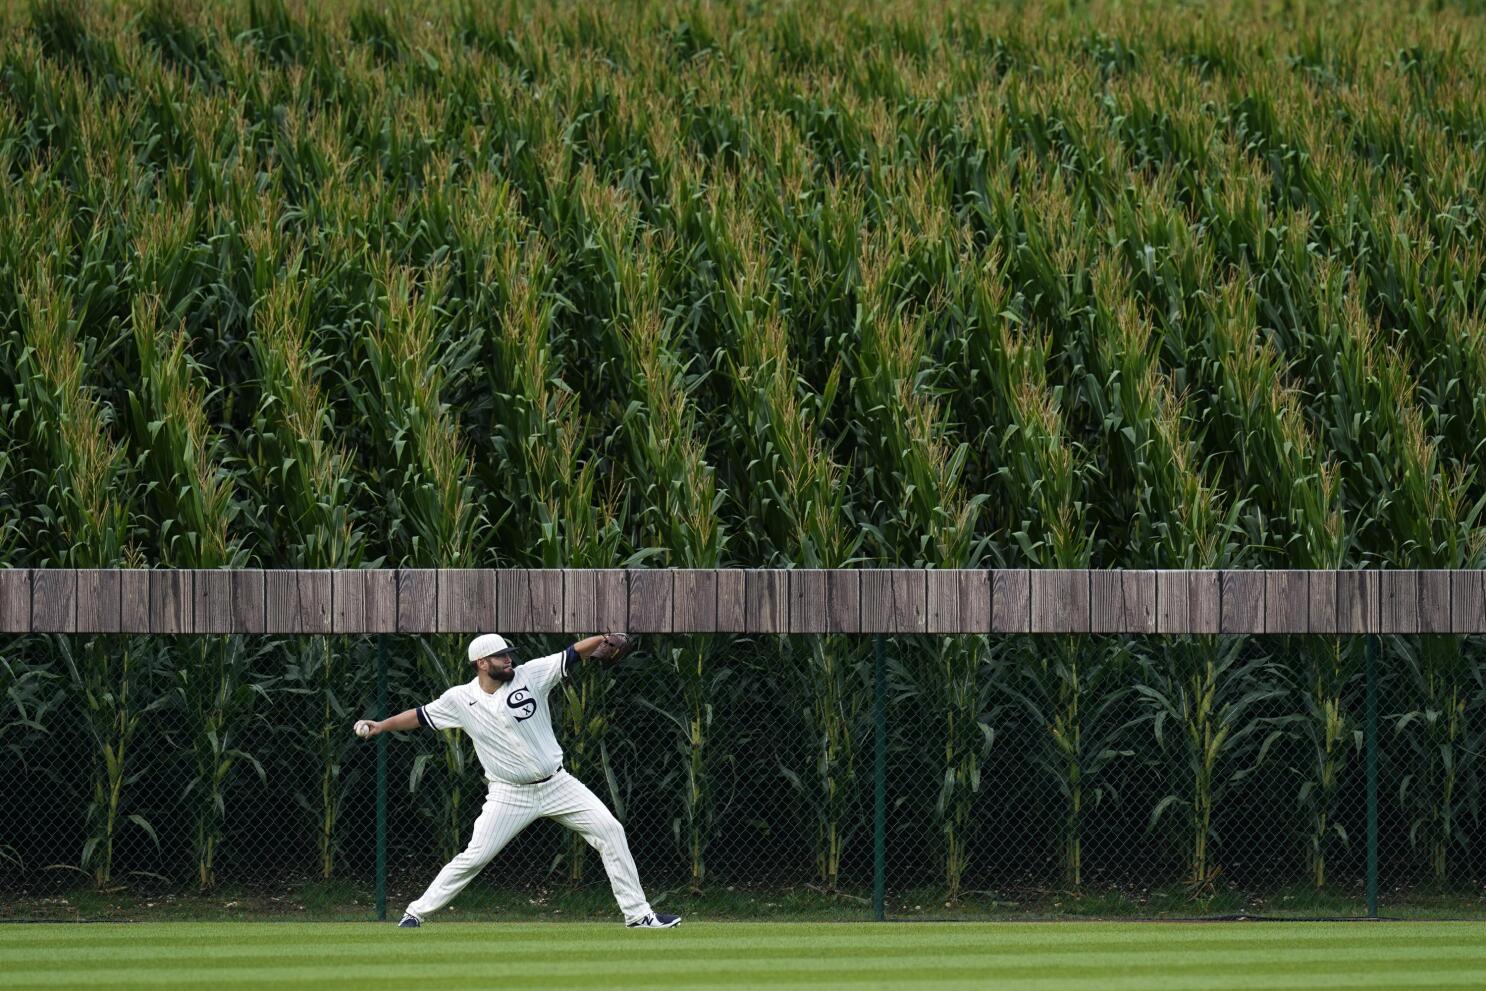 White Sox, Yankees Go Deep Into Corn In 'Field Of Dreams' Game, White Sox  Win With Hollywood Ending - CBS Chicago